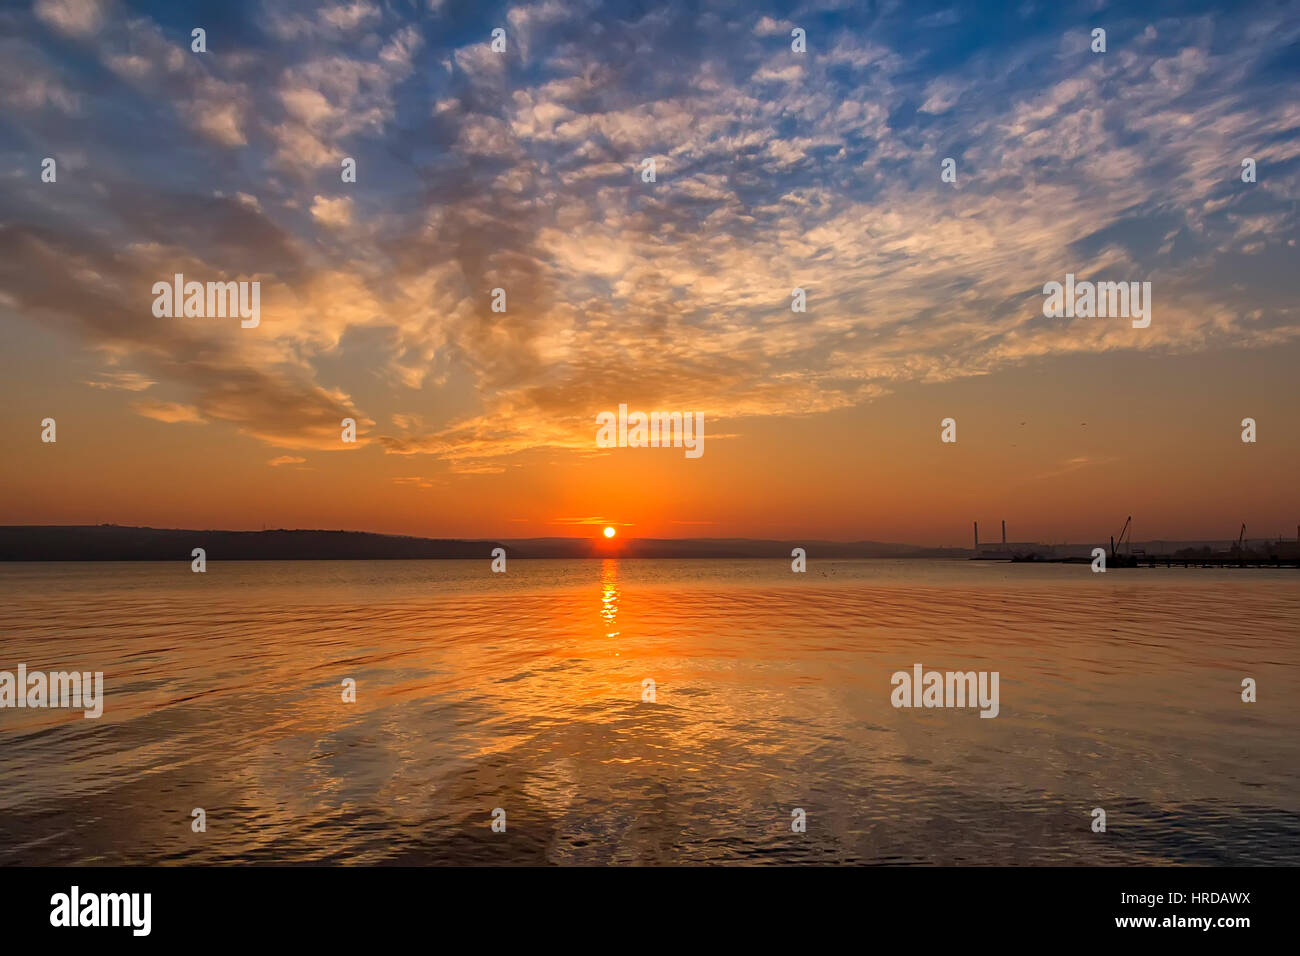 Exciting lake sunset with reflection Stock Photo